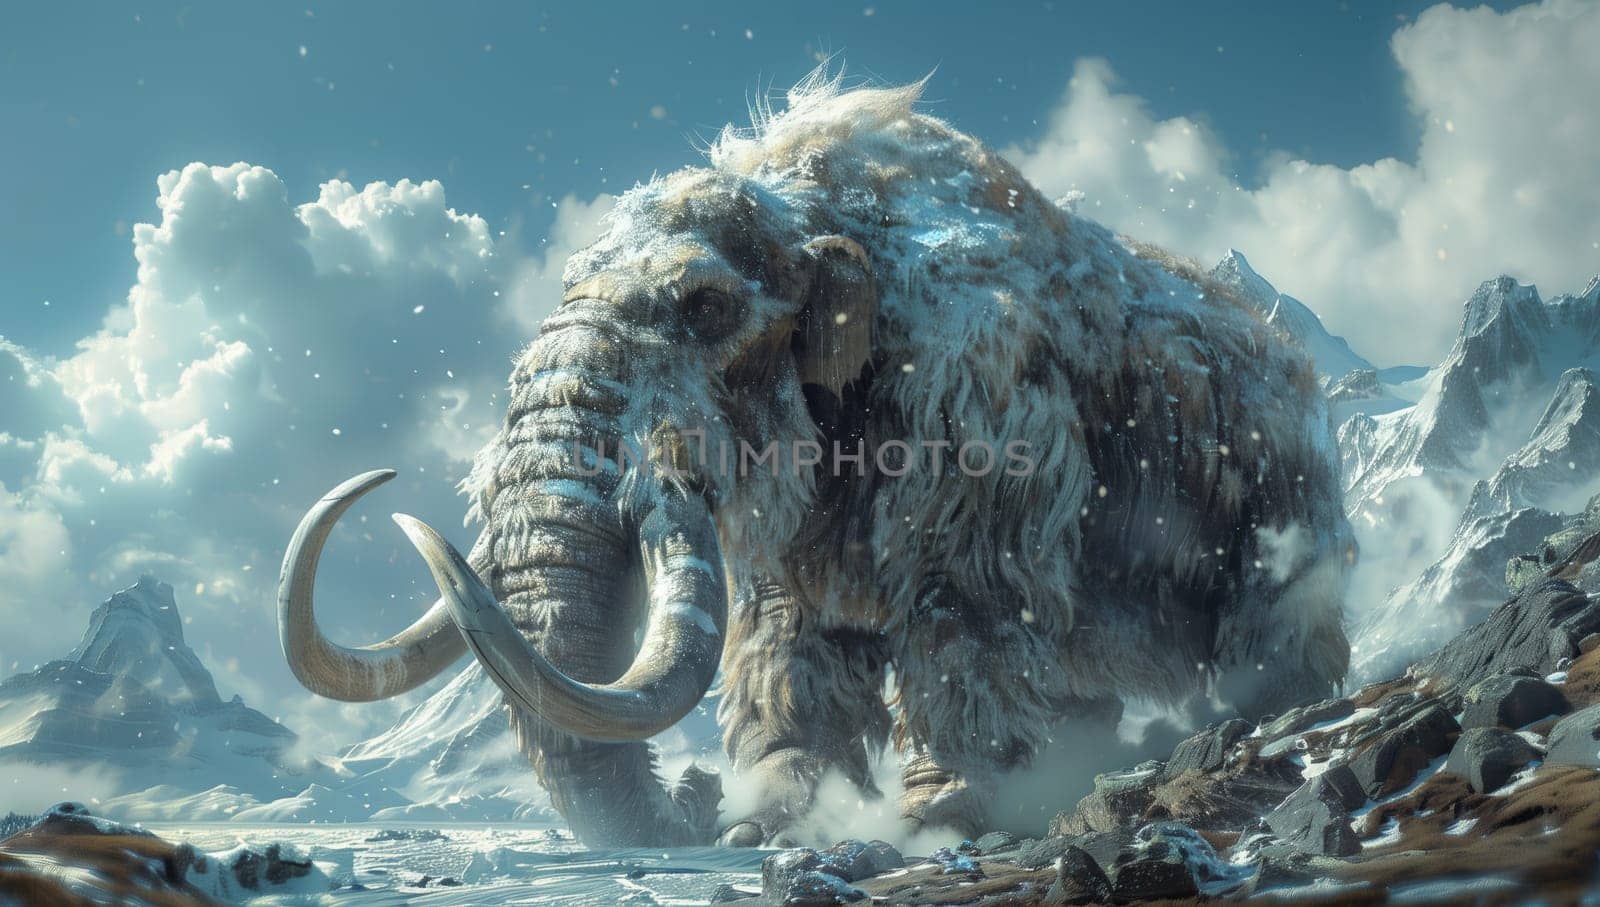 A mammoth trudging through snow in the mountains under a cloudy sky by richwolf